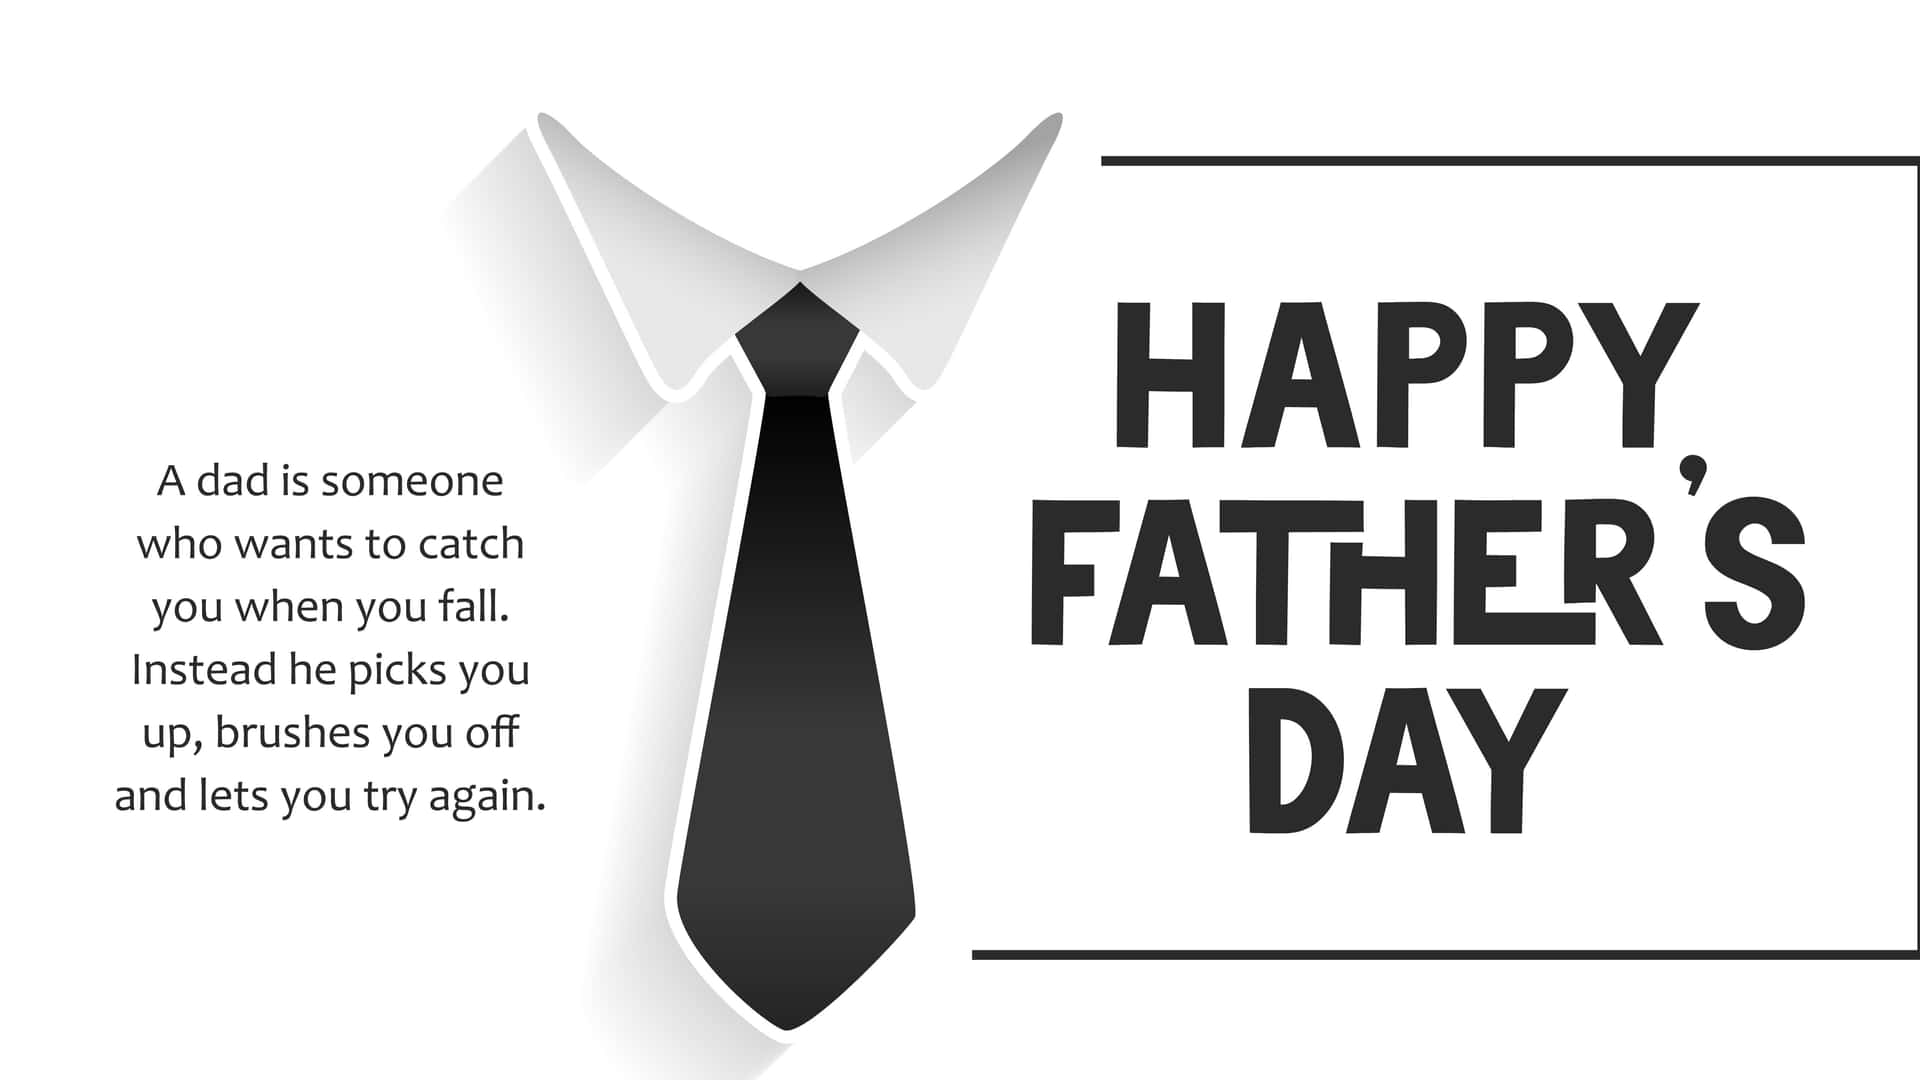 “Show your love and appreciation this Father’s Day!”